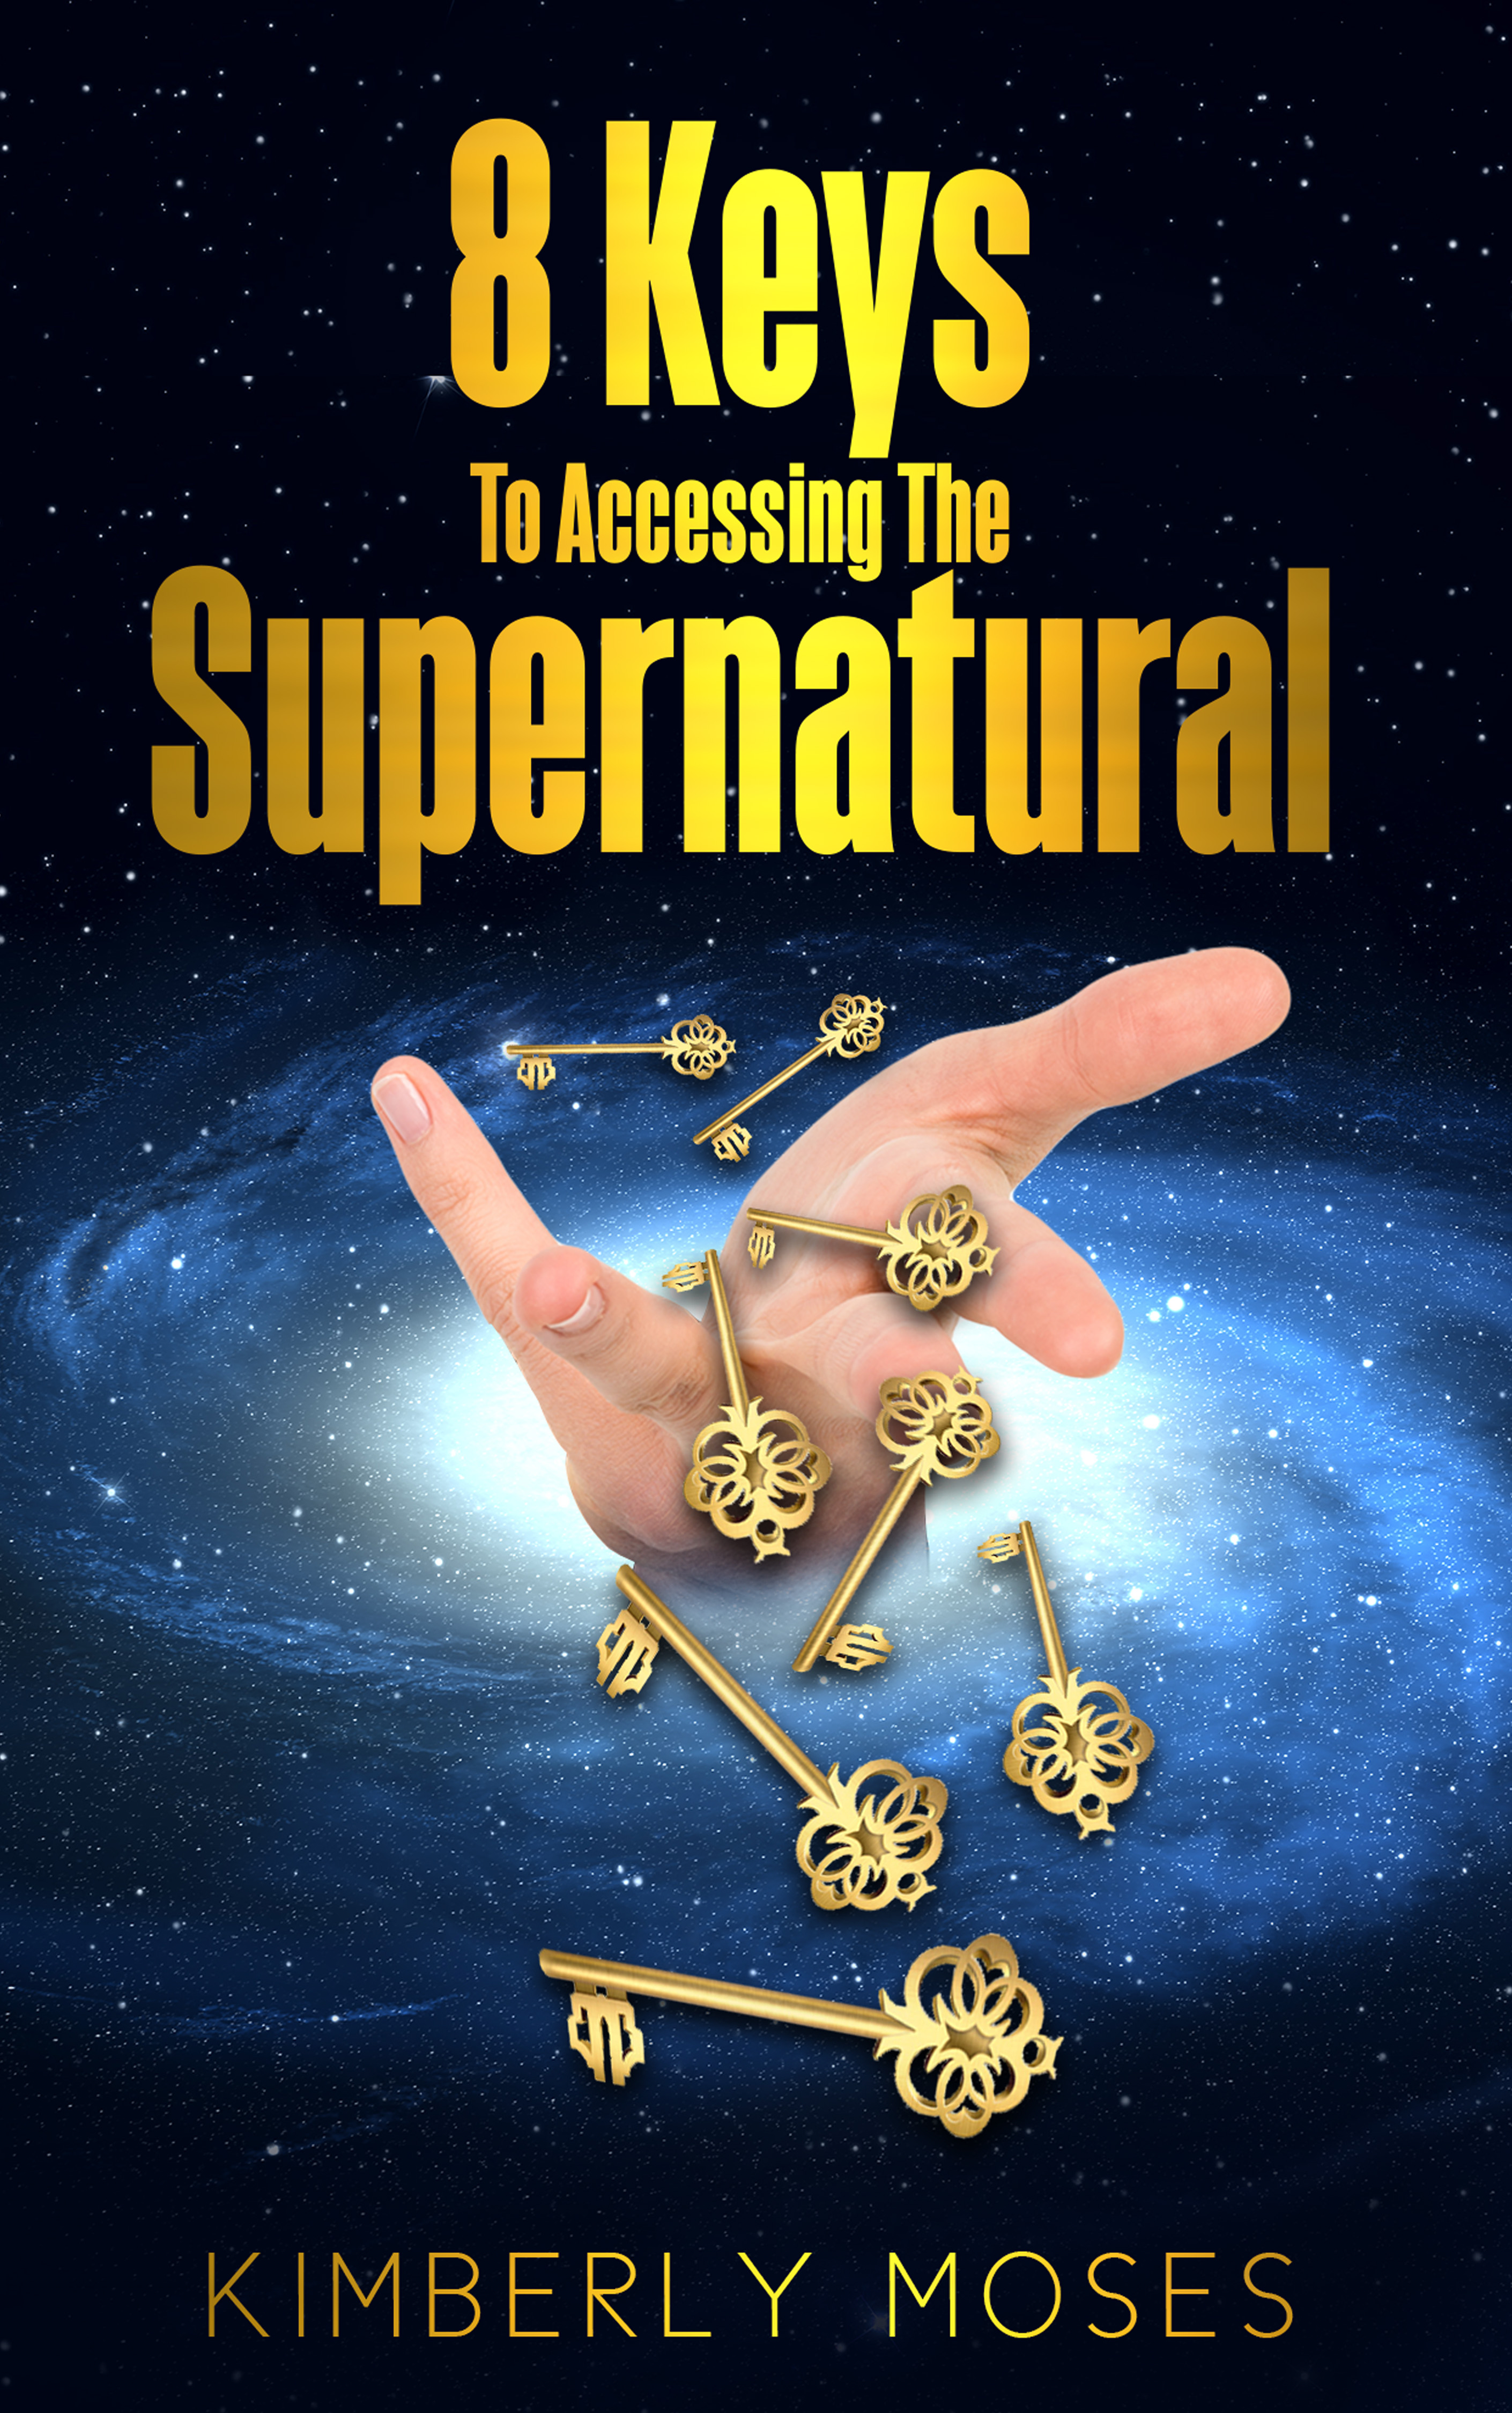 8 Keys To Accessing The Supernatural